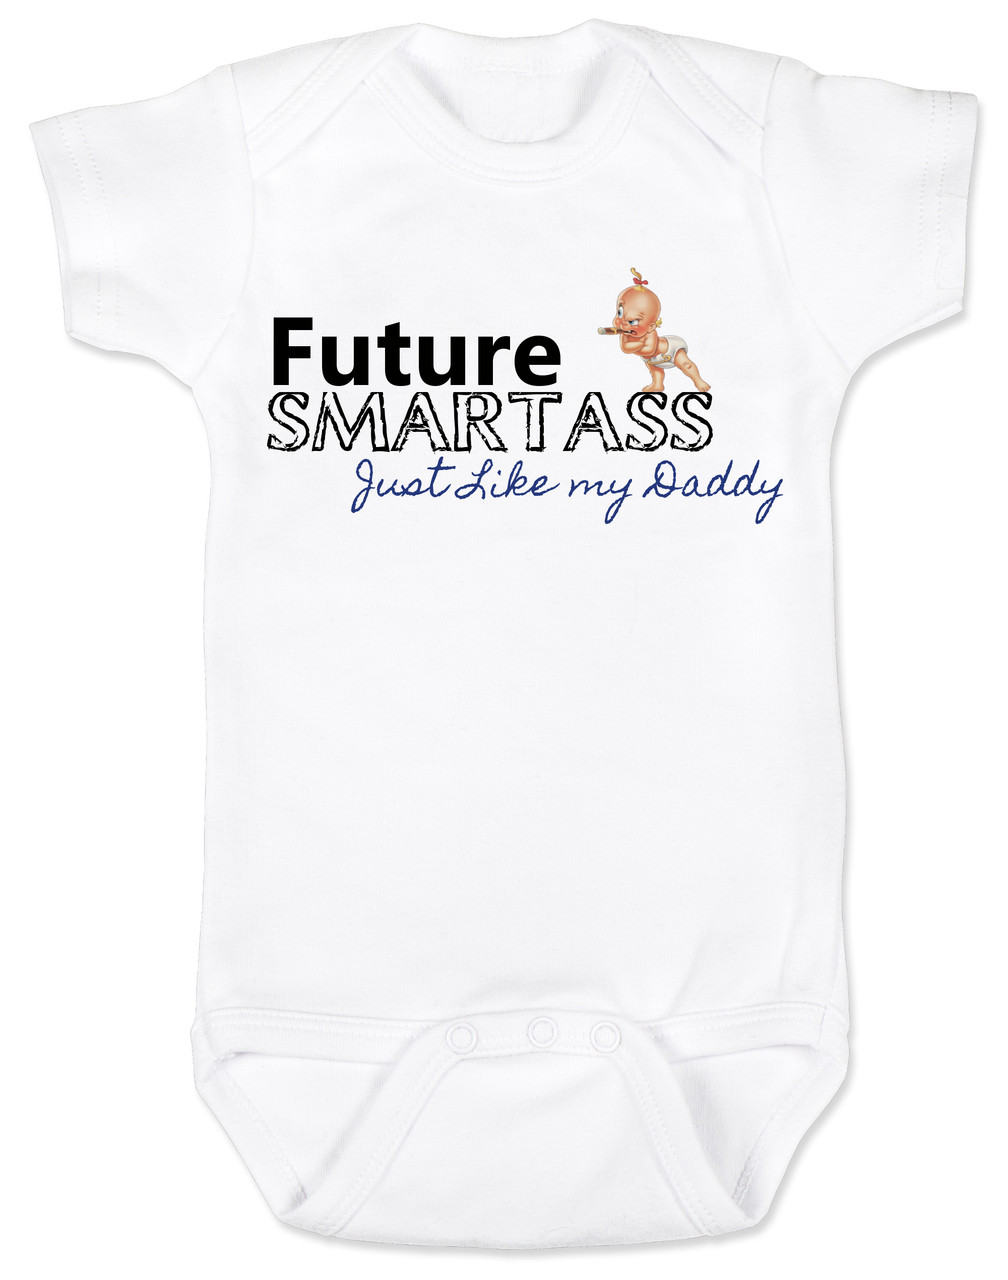 funny baby onesies about dadphoto